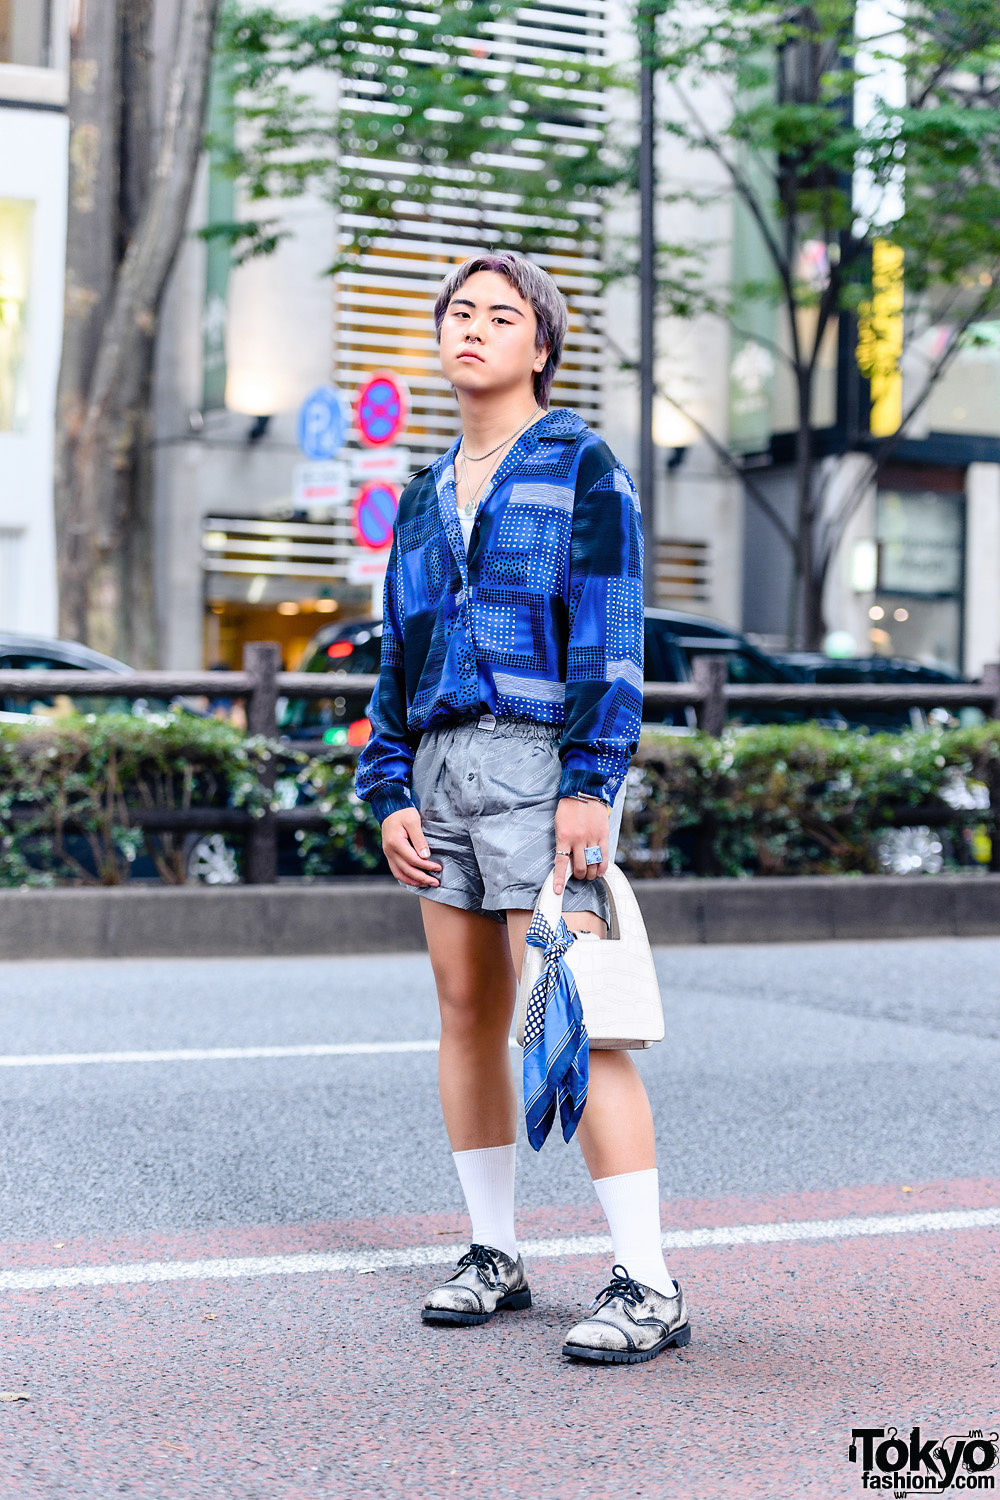 Tokyo Menswear Street Style w/ Two-Tone Hair, Abstract Print Shirt, Eytys Boxer Shorts, Cartier, The Four-Eyed, Zara & Getta Grip Leather Shoes